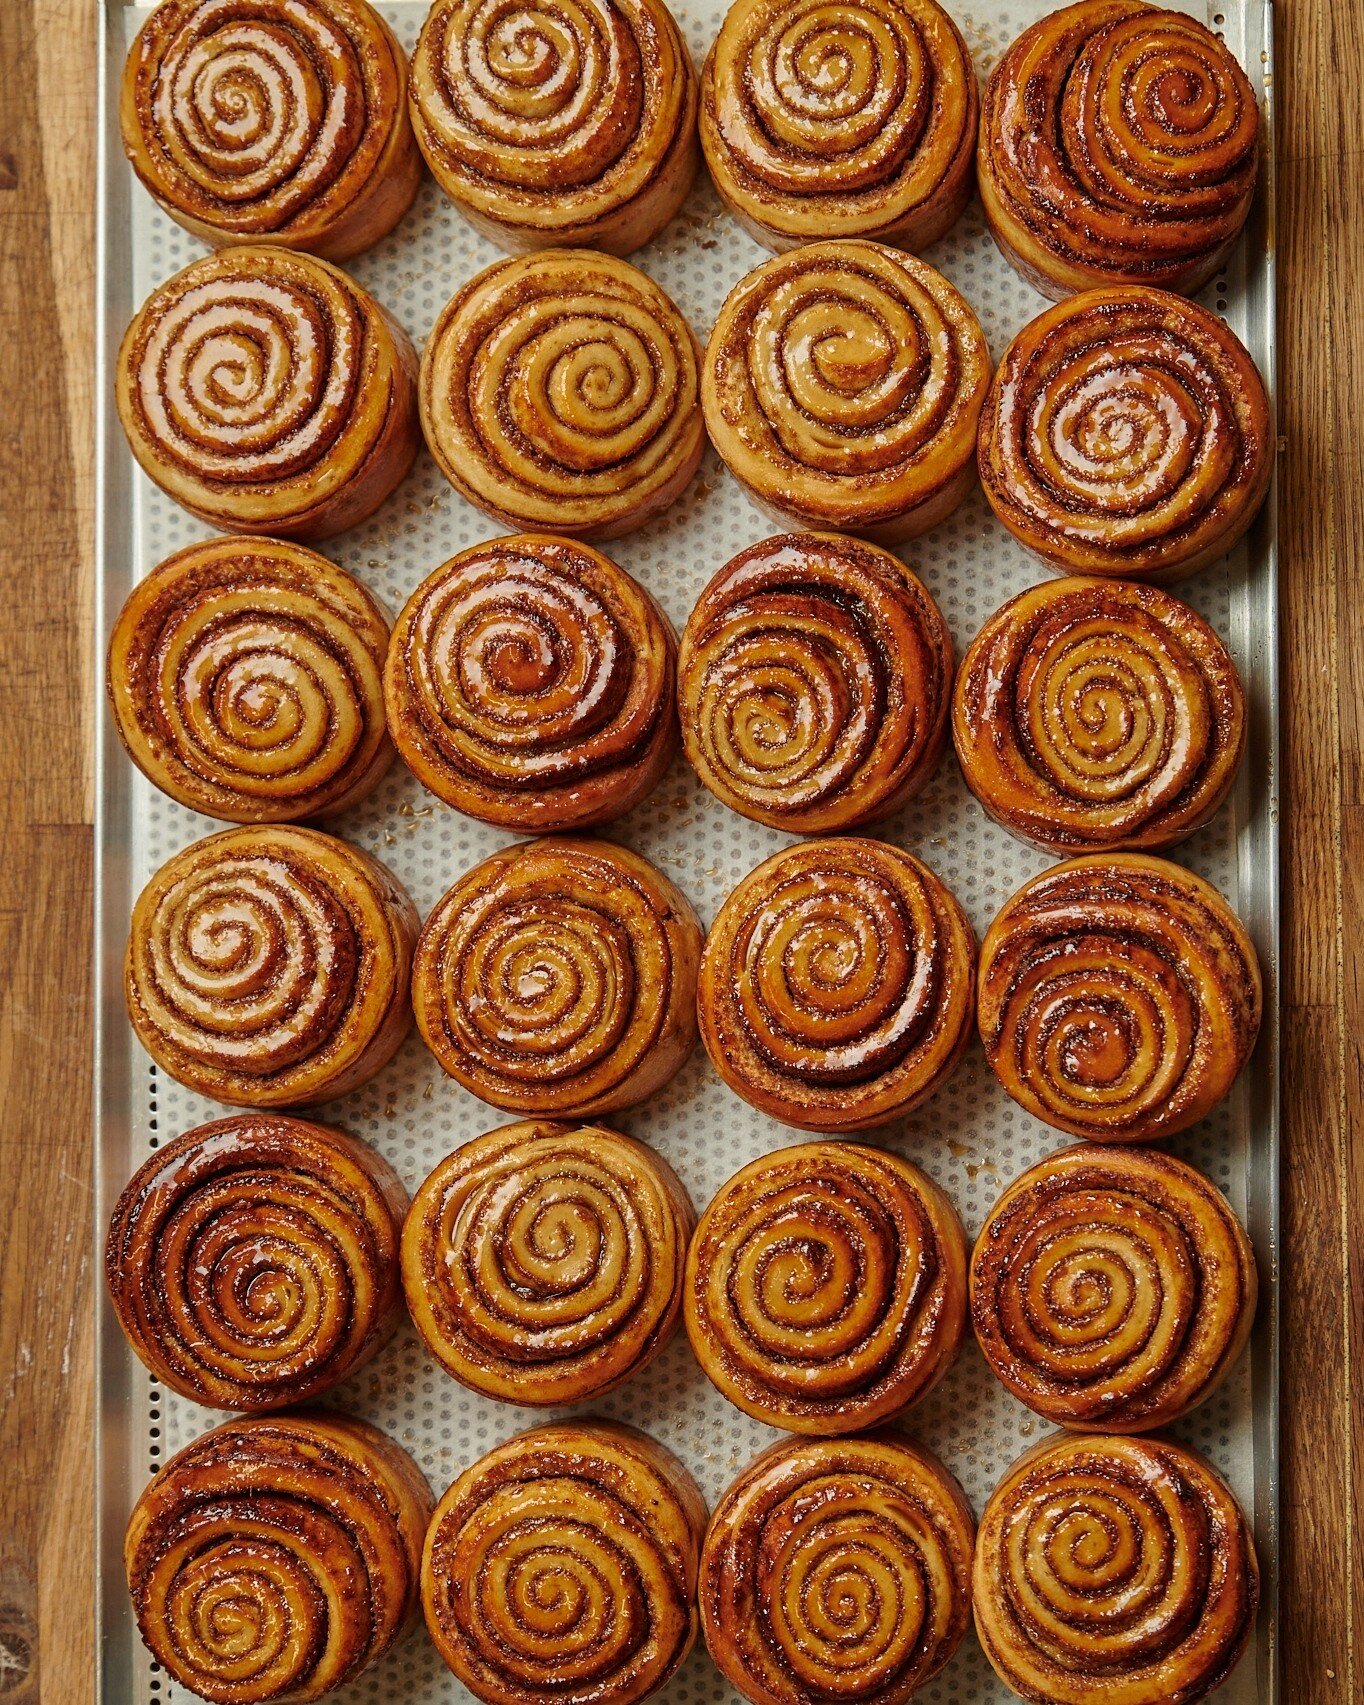 OUR VEGAN CINNAMON ROLLS&hellip;

If you&rsquo;re looking for an all vegan pastry our vegan cinnamon roll is the one you&rsquo;re looking for. With it&rsquo;s super soft dough, creamy cinnamon remonce and slightly caramelized top with orange zest you